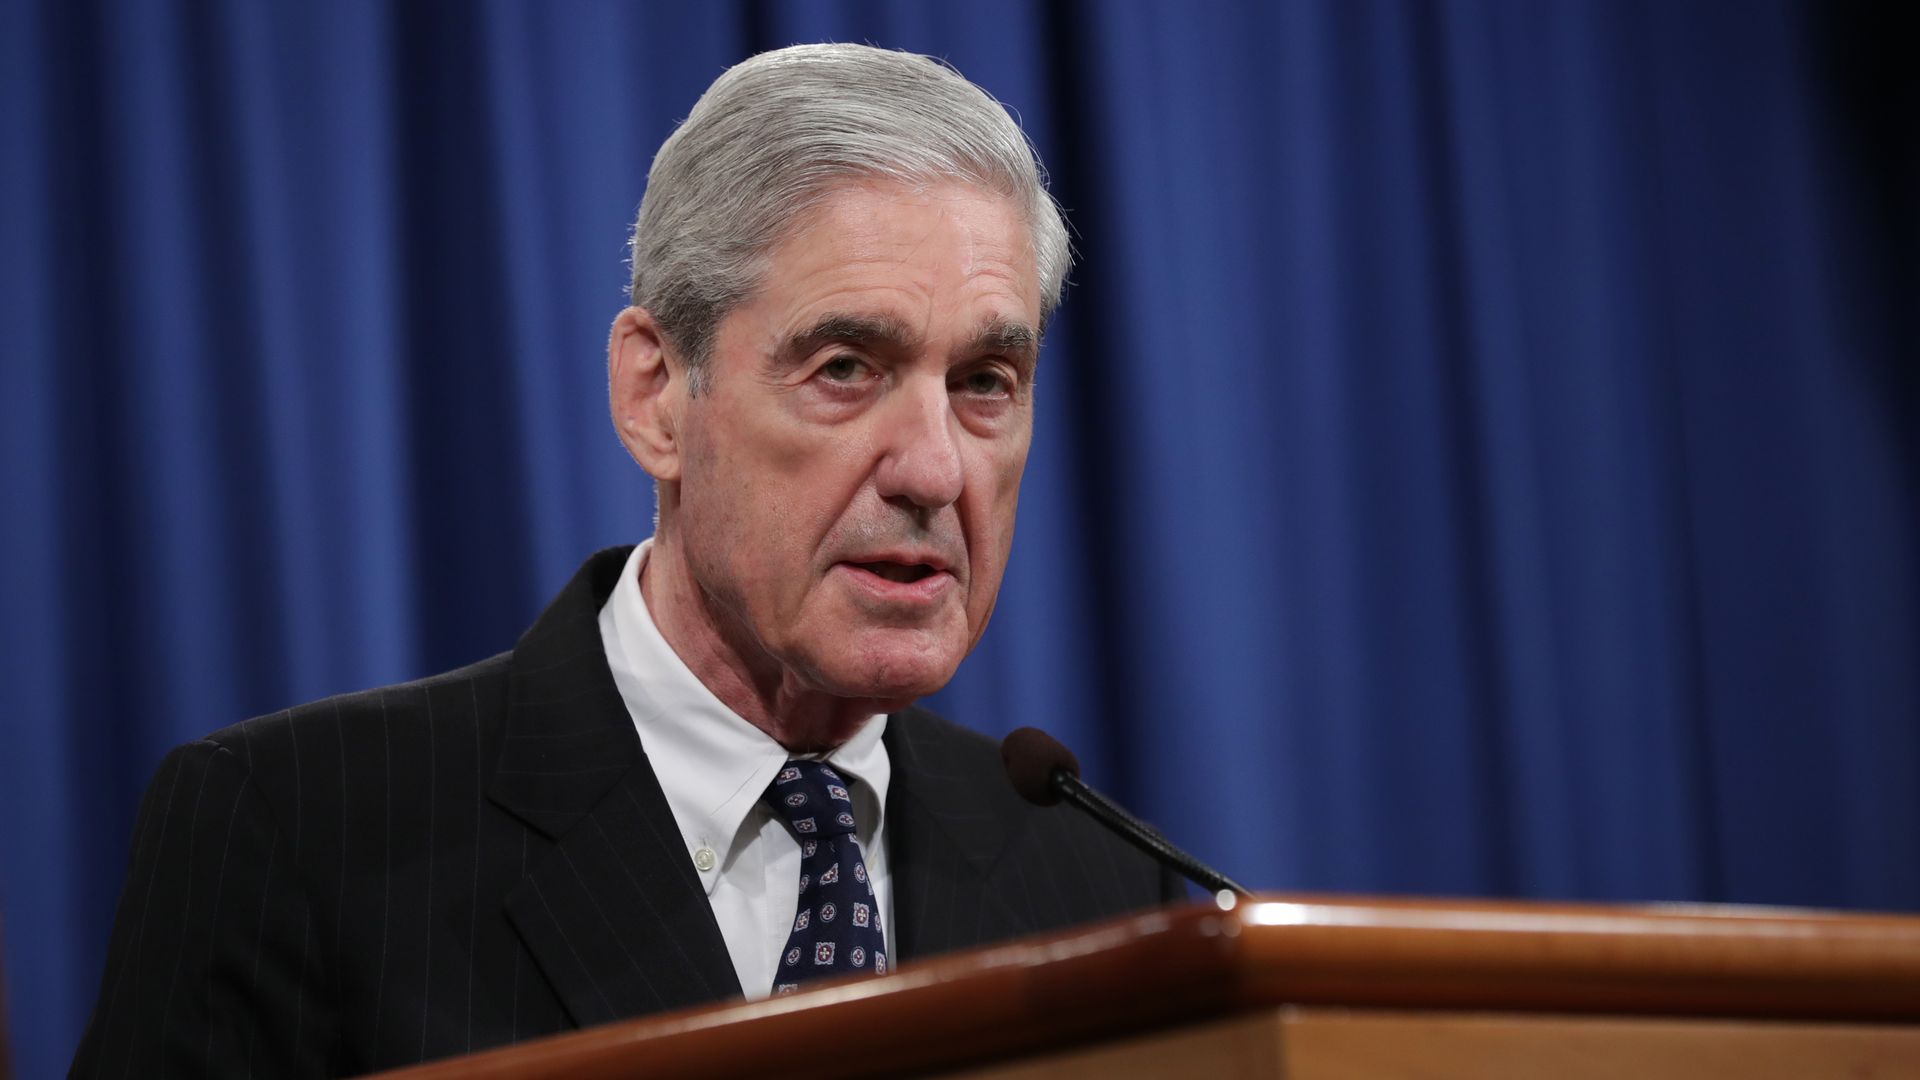 Special Counsel Robert Mueller makes a statement about the Russia investigation on May 29, 2019 